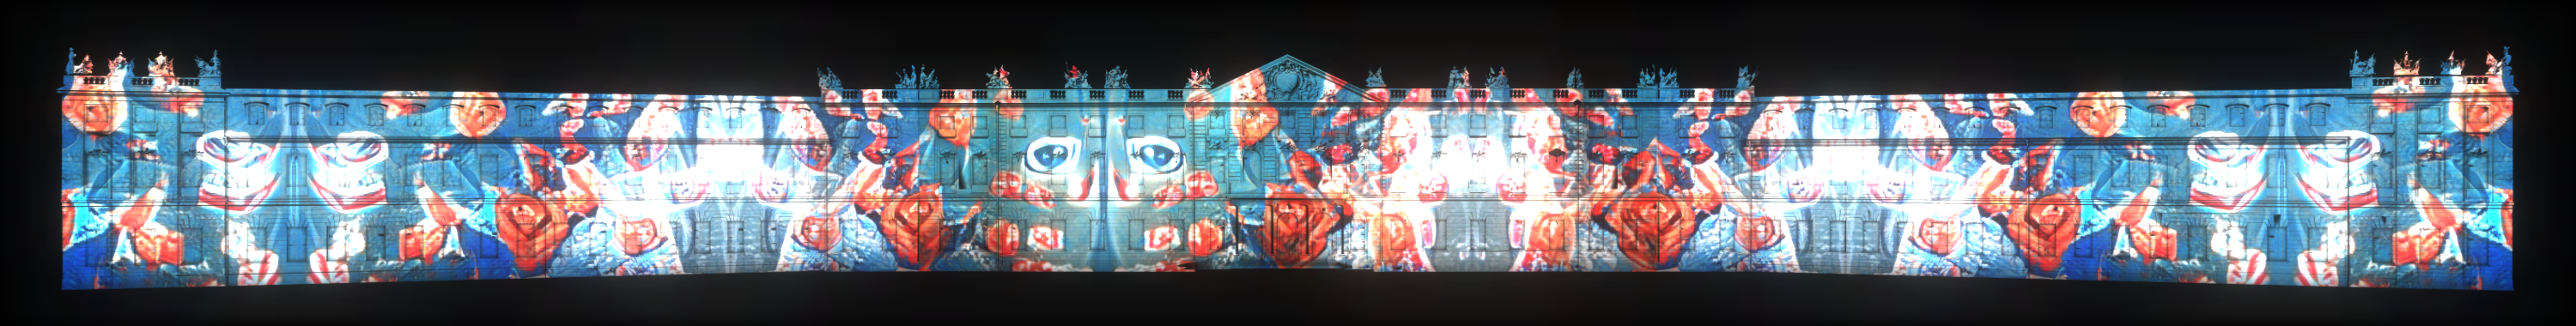 On the facade of the castle in Karlsruhe you can see a projection mapping that glows at night.The mapping shows abstract shapes in red and blue.